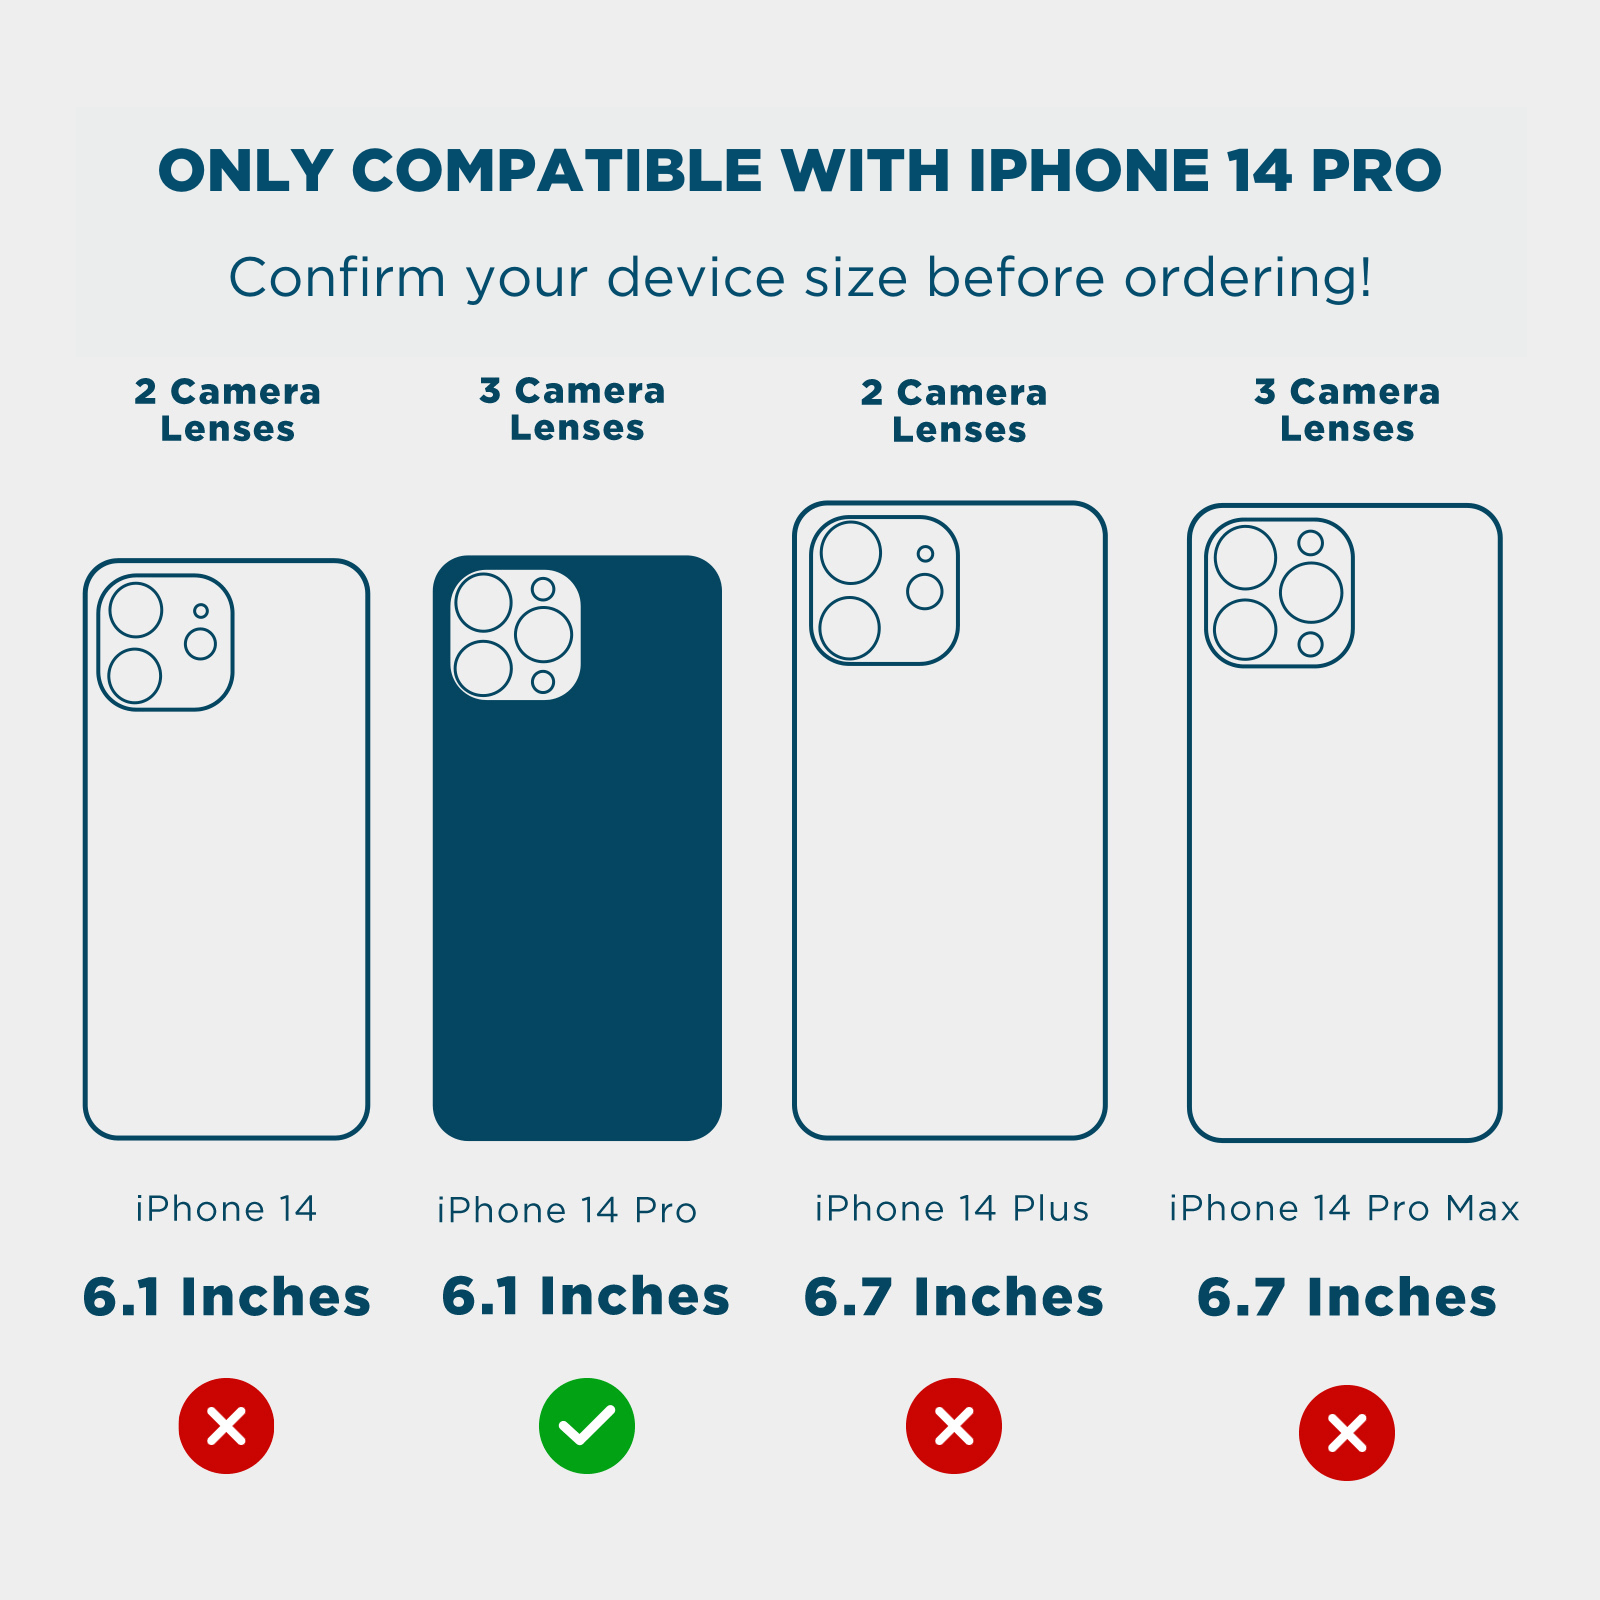 ONLY COMPATIBLE WITH IPHONE 14 PRO. CONFIRM YOUR DEVICE SIZE BEFORE ORDERING. 2 CAMERA LENSES, 3 CAMERA LENSES, 2 CAMERA LENSES, 3 CAMERA LENSES, 6.1, 6.1, 6.7, 6.7. COLOR::FLORAL GEMS